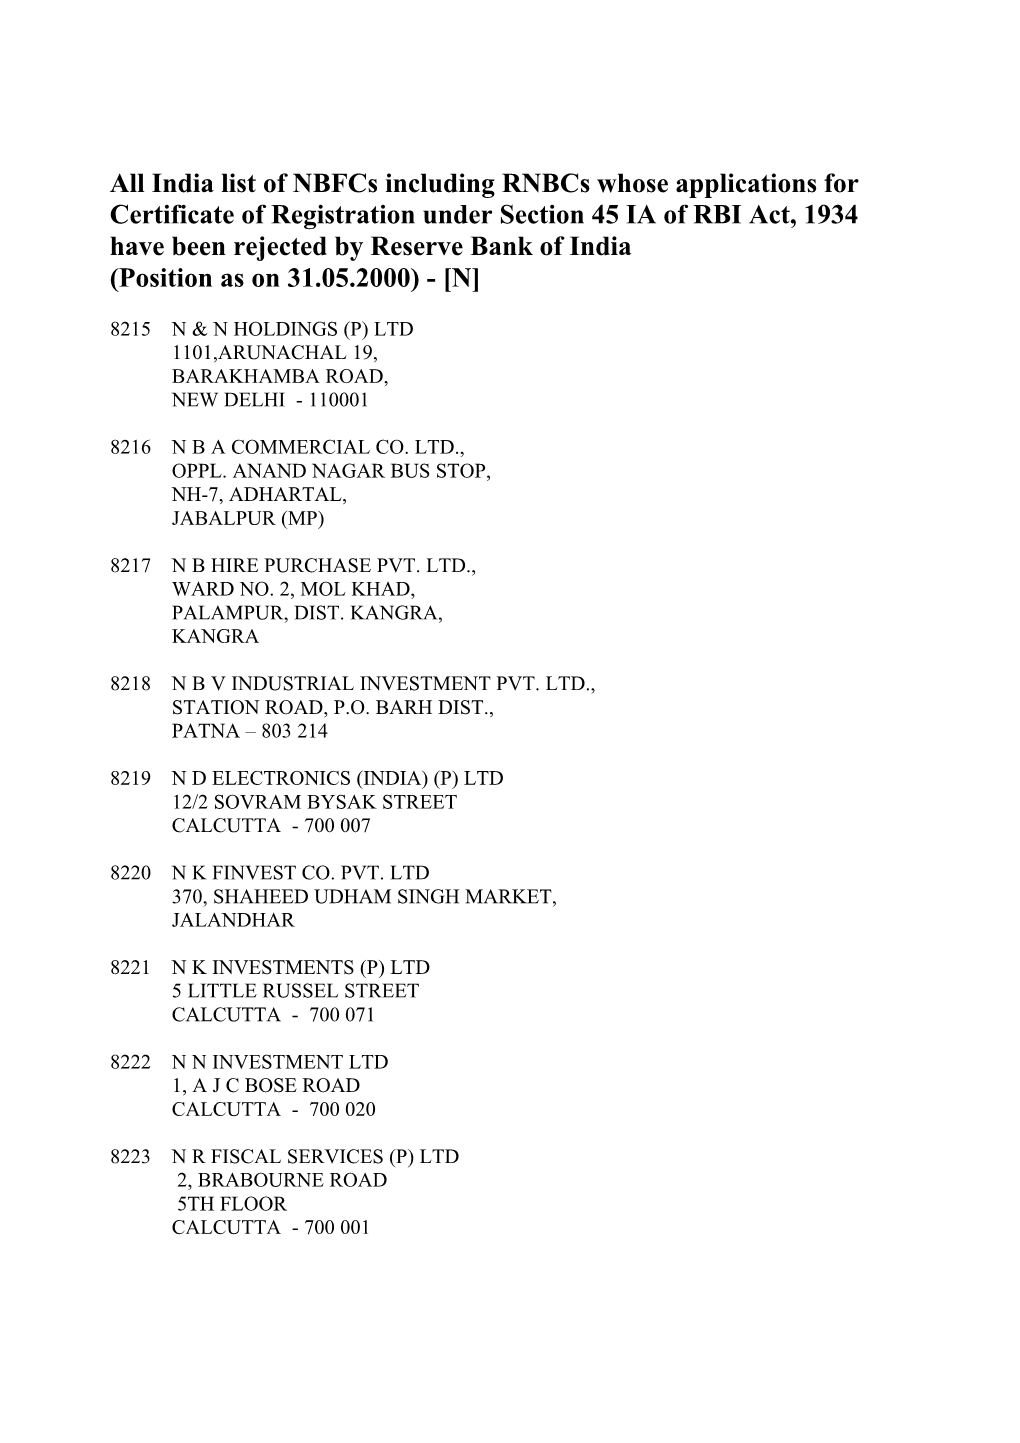 India List of Nbfcs Including Rnbcs Whose Applications for Certificate Of